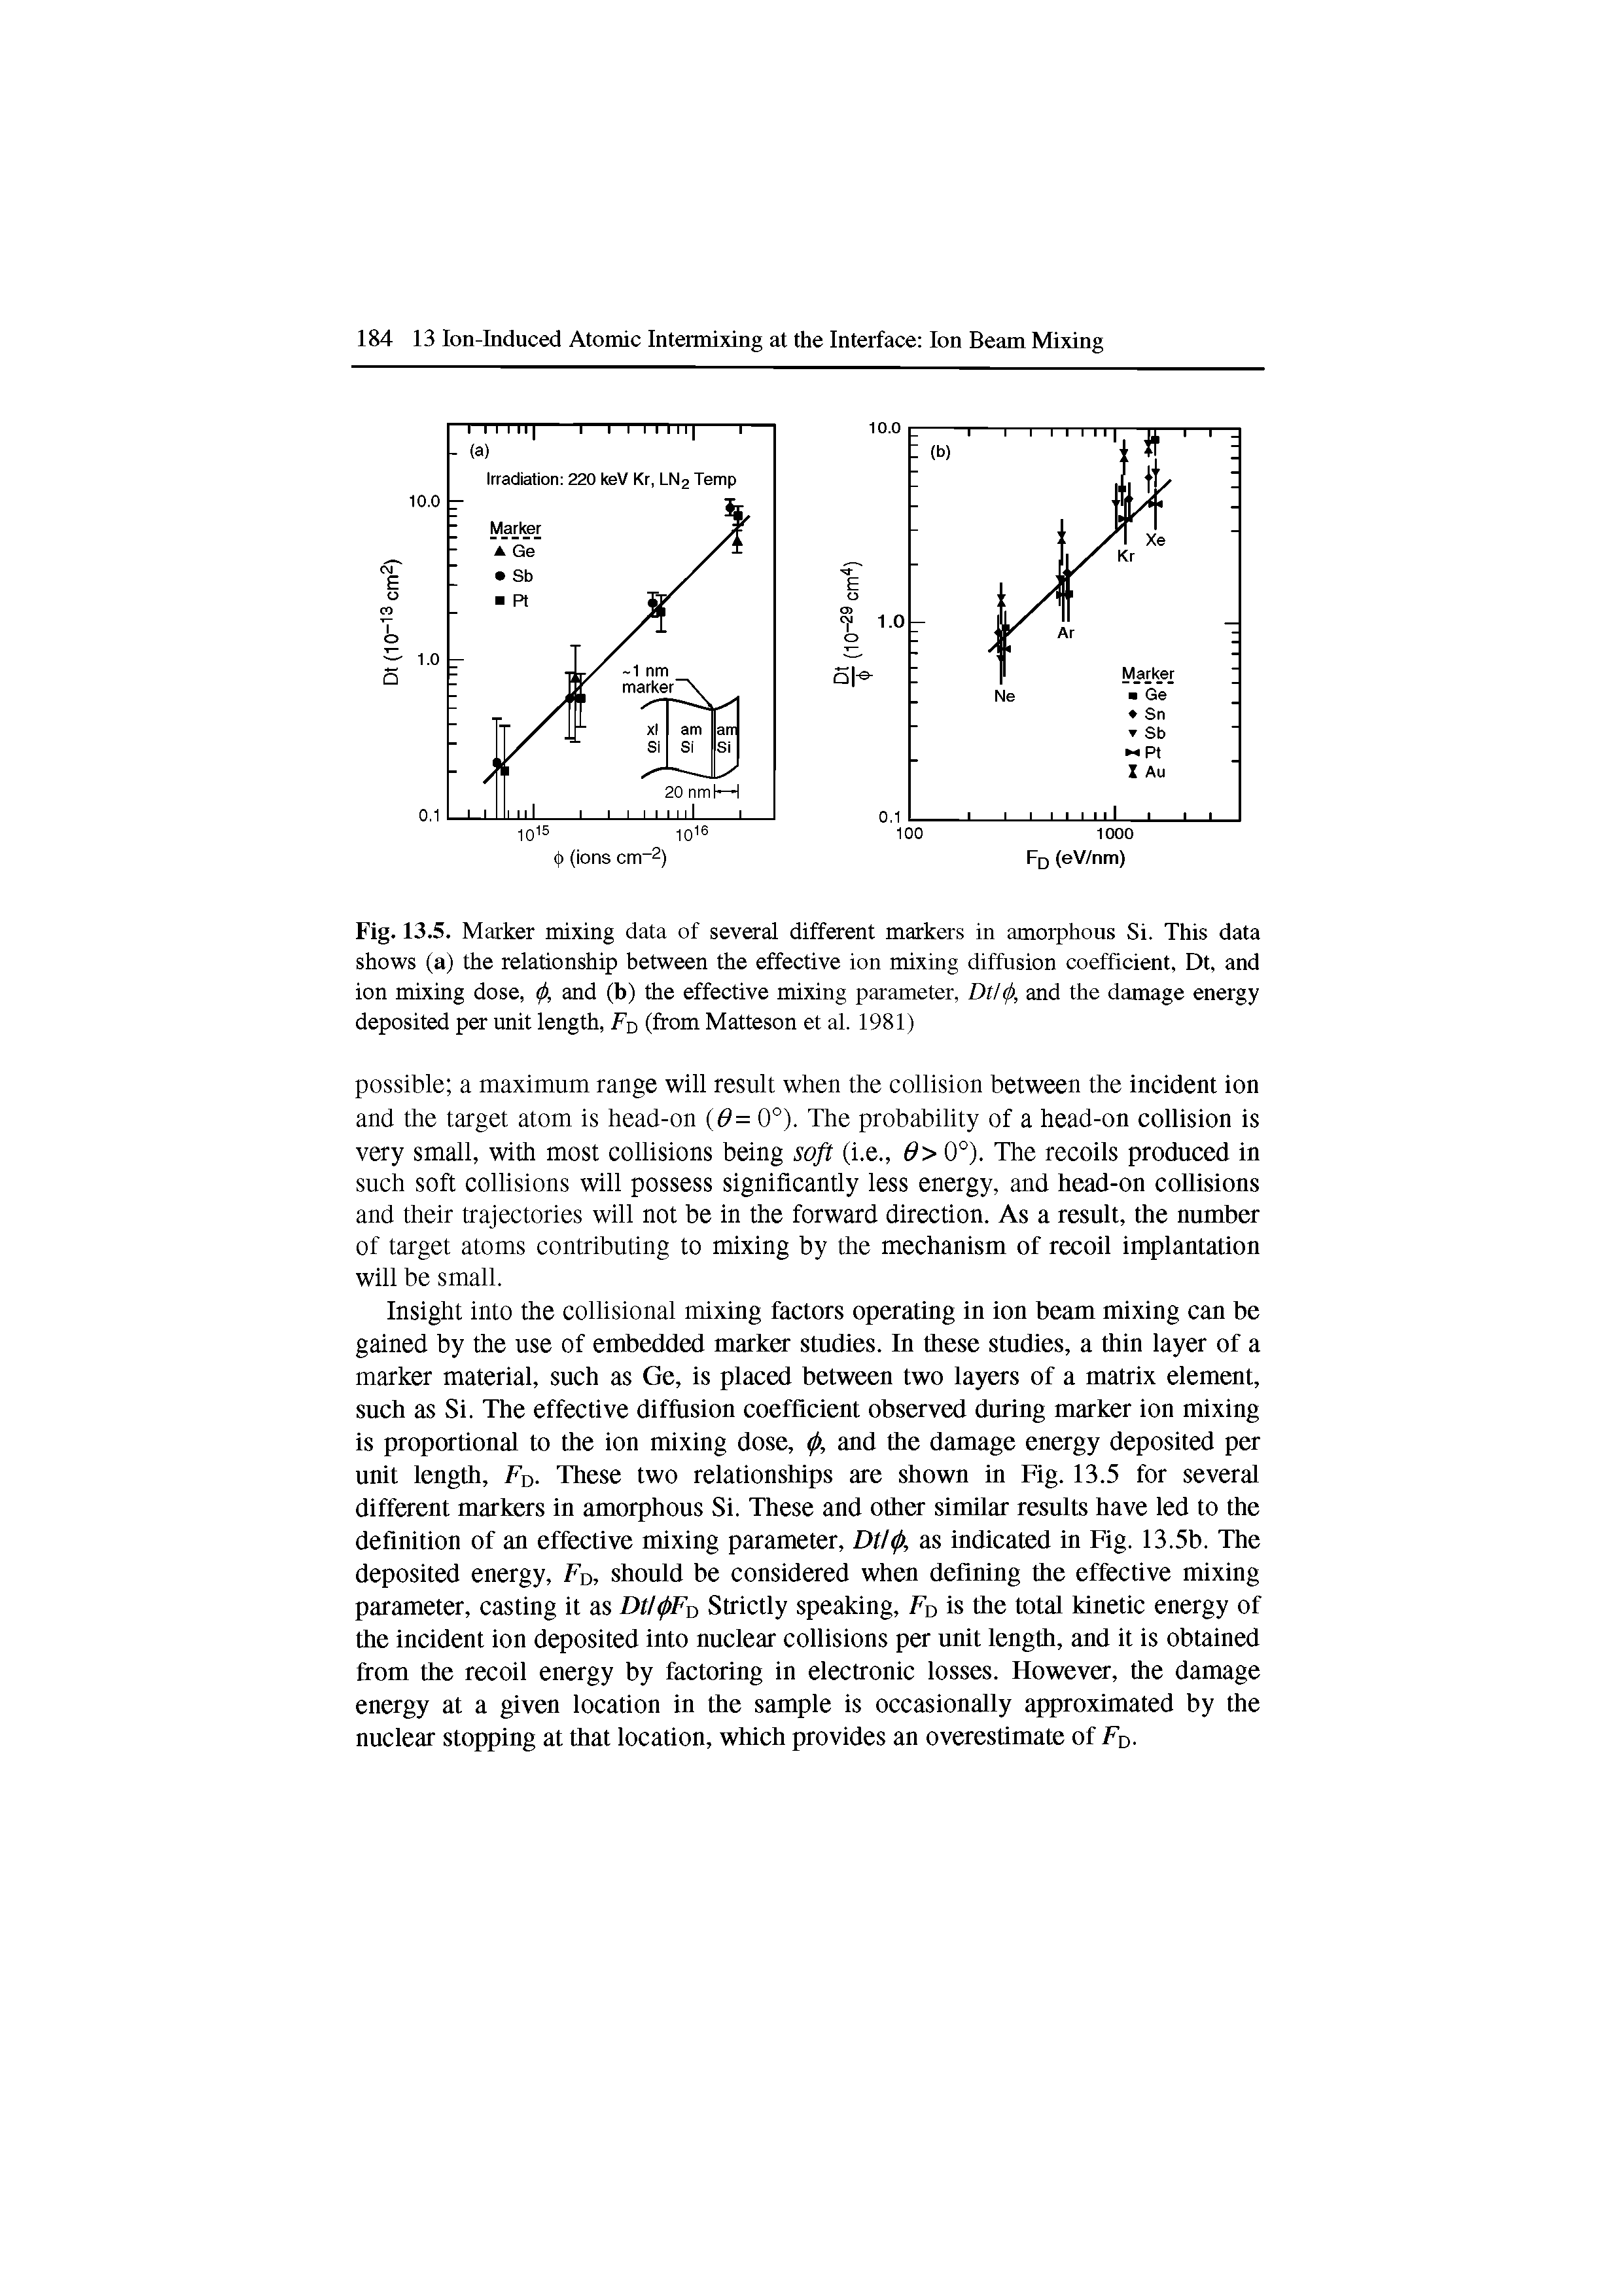 Fig. 13.5. Marker mixing data of several different markers in amorphous Si. This data shows (a) the relationship between the effective ion mixing diffusion coefficient, Dt, and ion mixing dose, tp, and (b) the effective mixing parameter, Dthp, and the damage energy deposited per unit length, FD (from Matteson et al. 1981)...